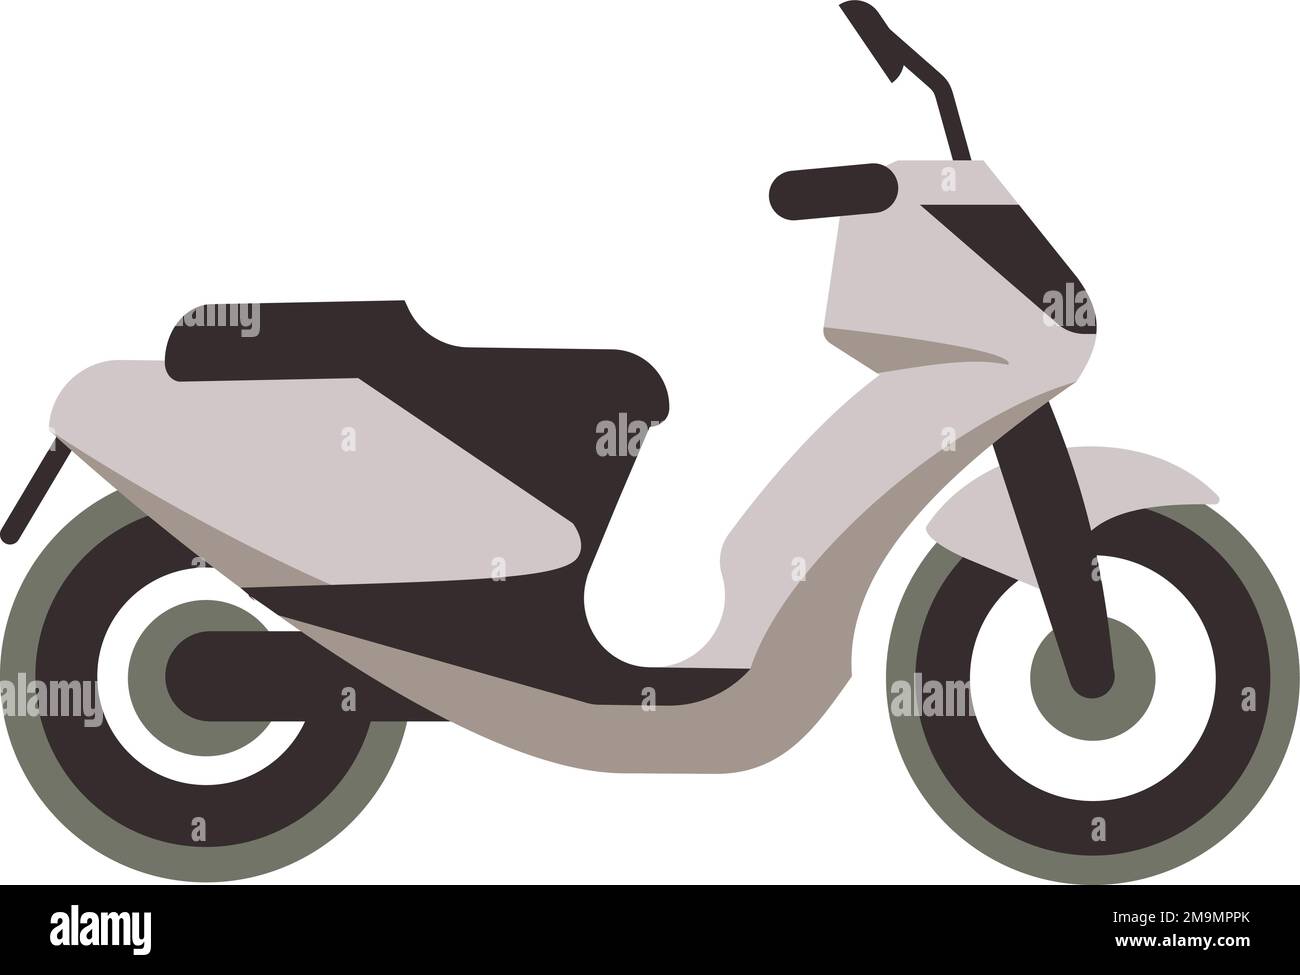 Touring bike icon. Cartoon motorcycle side view Stock Vector